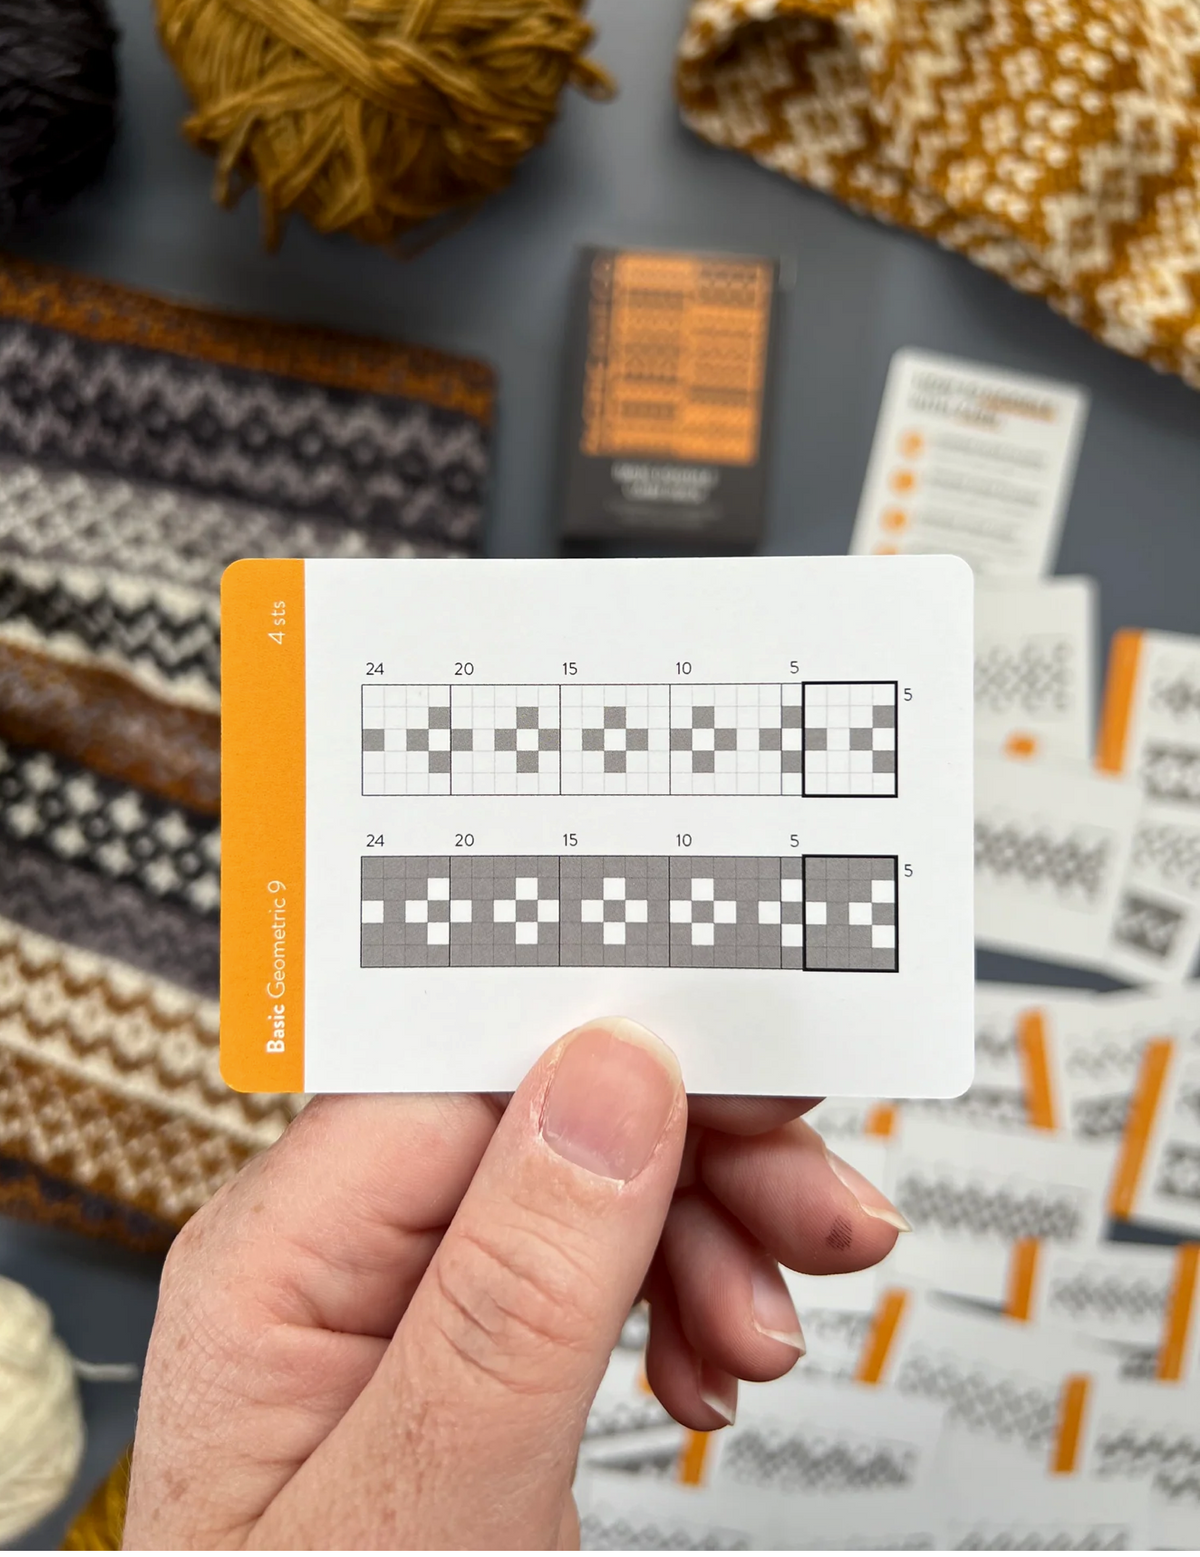 Pacific Knit Co - Basic Doodle Card Deck - YourNextKnit